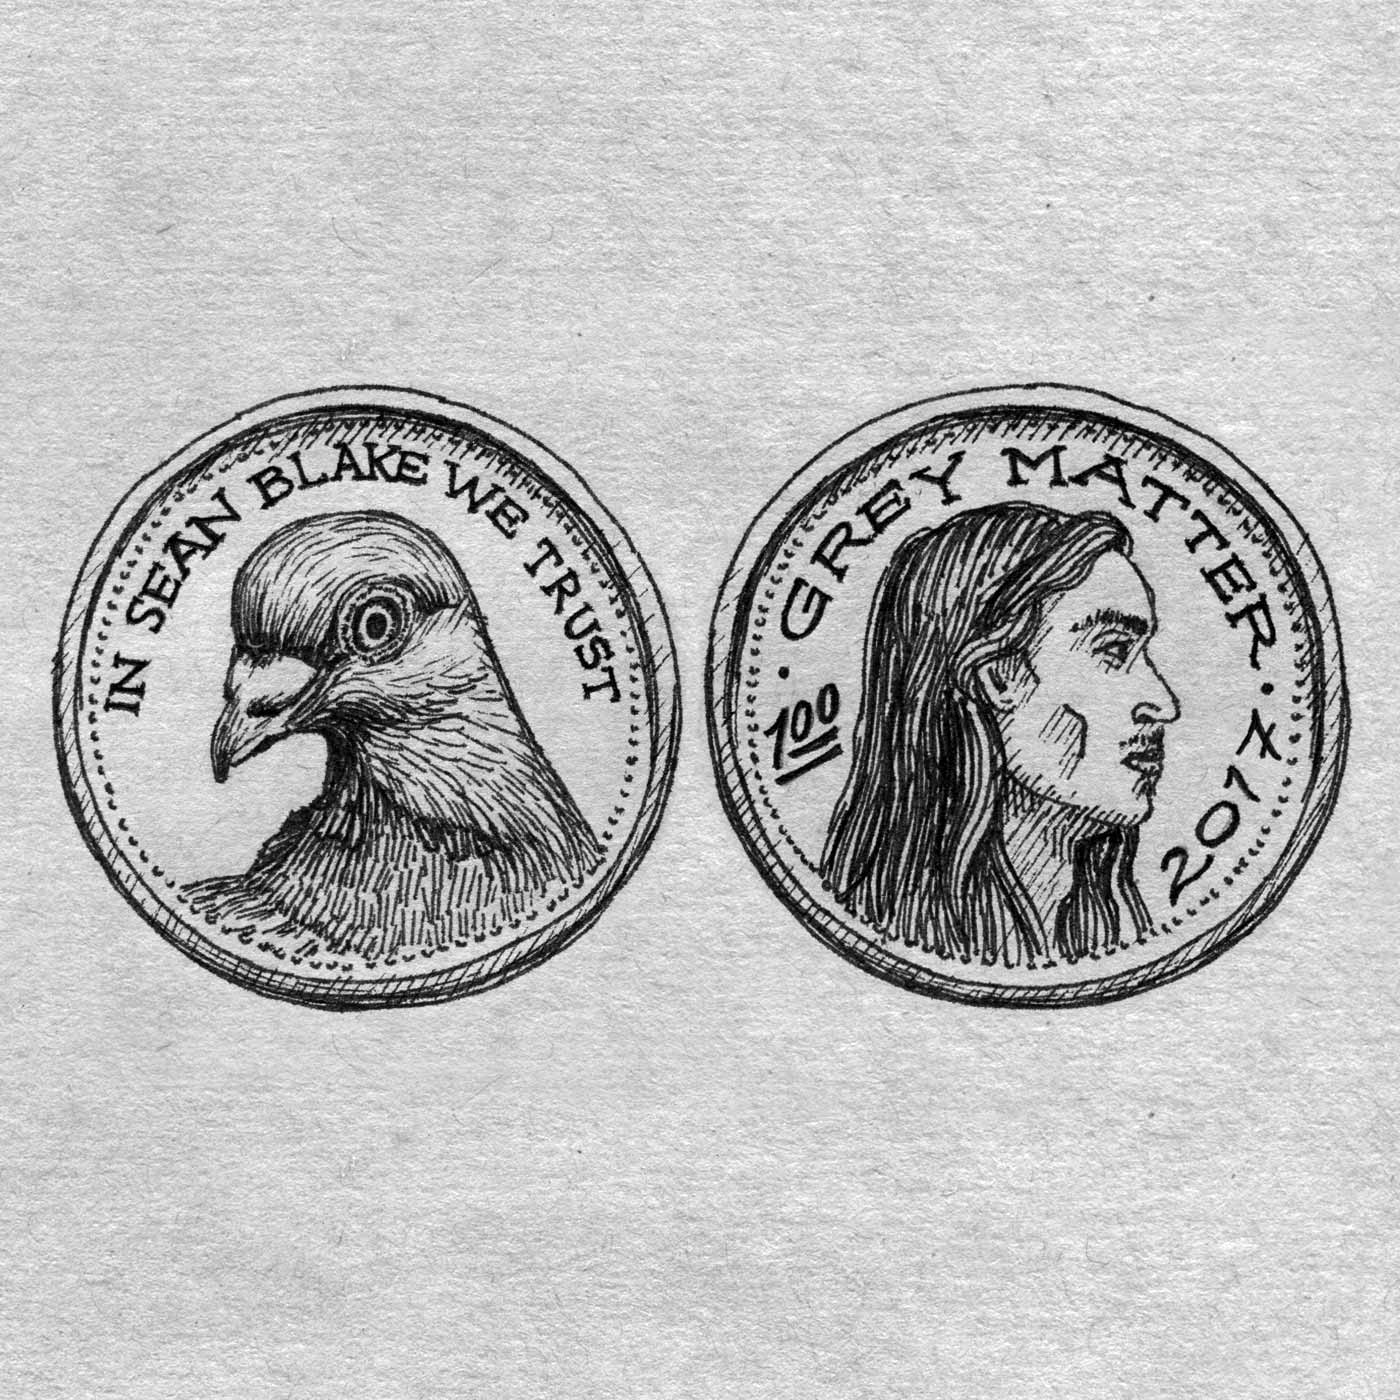 Sketch of a coin featuring Sean Blake HTF and a pigeon